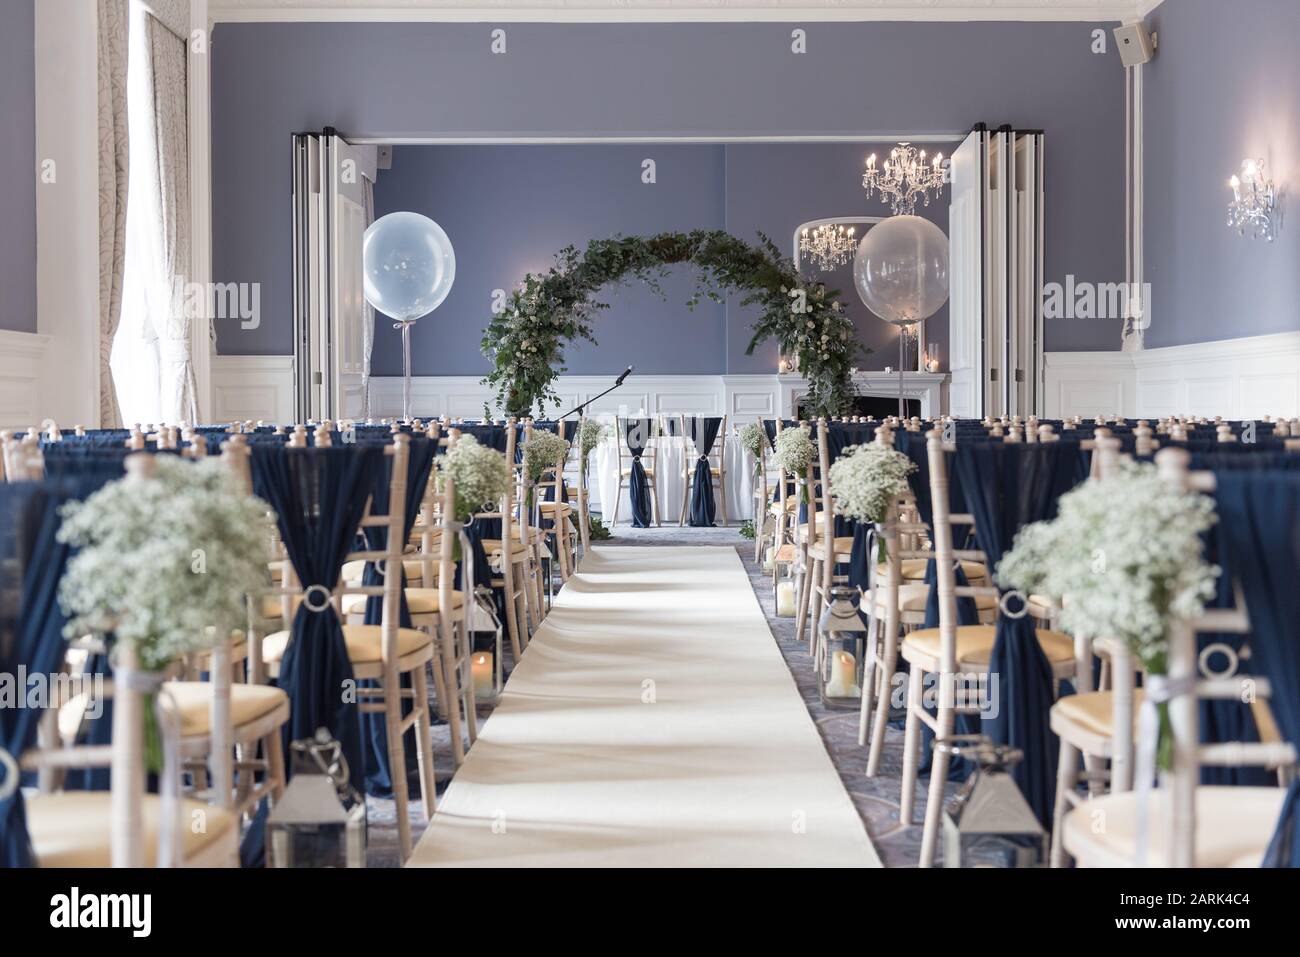 ceremony room for weddings with flowers and dark blue dressings Stock Photo